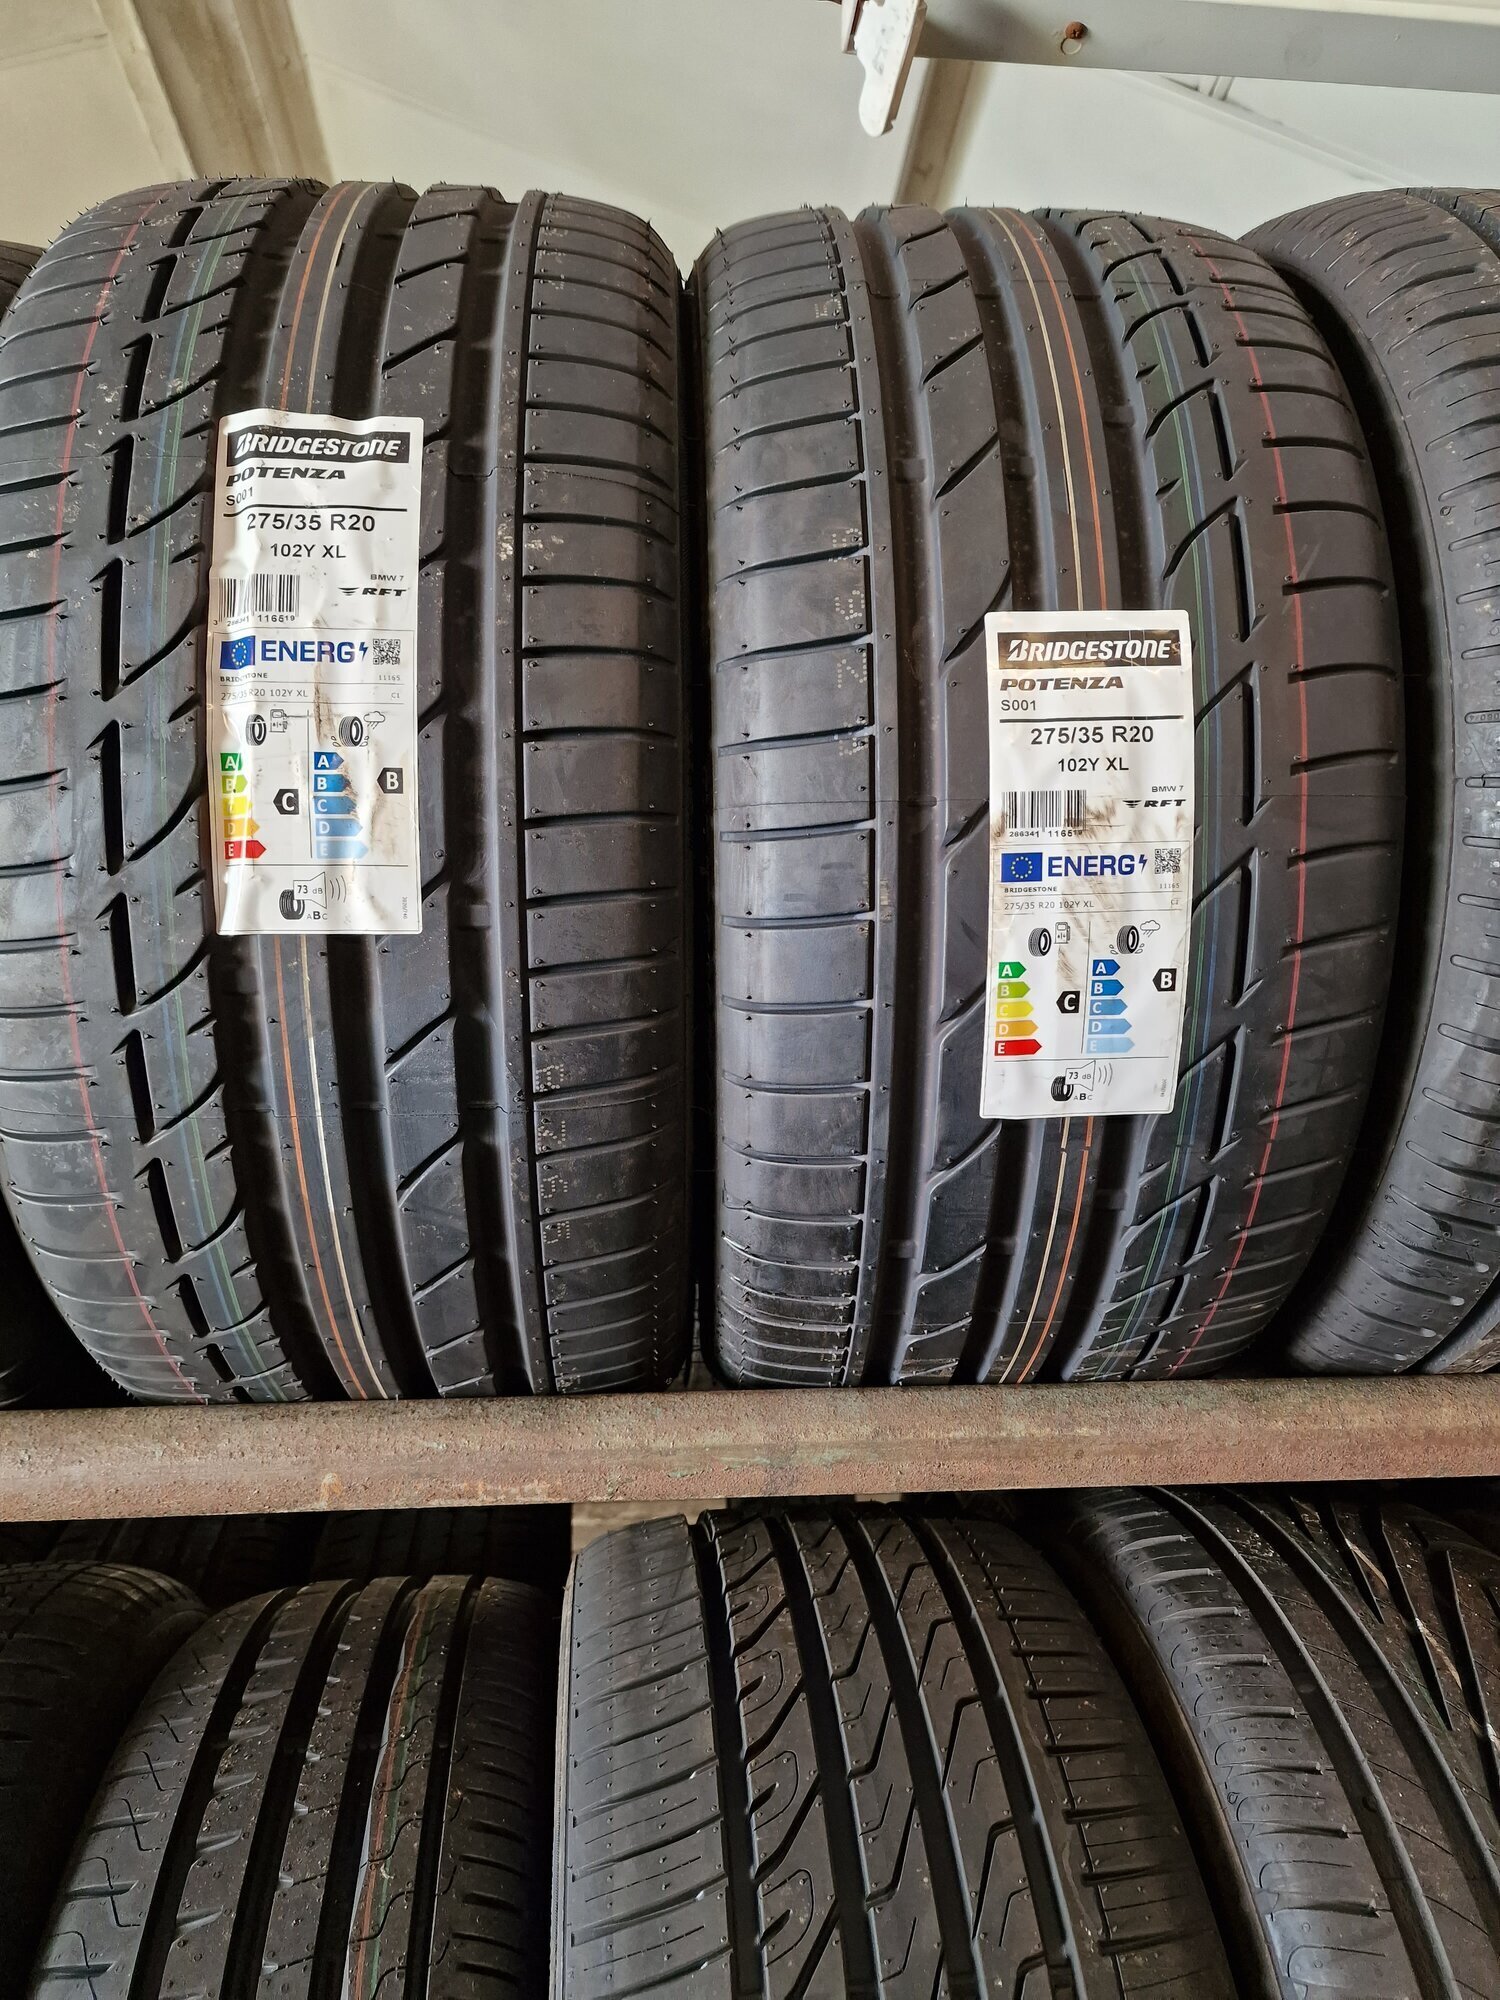 Images Dan's Mobile Tyres 24/7